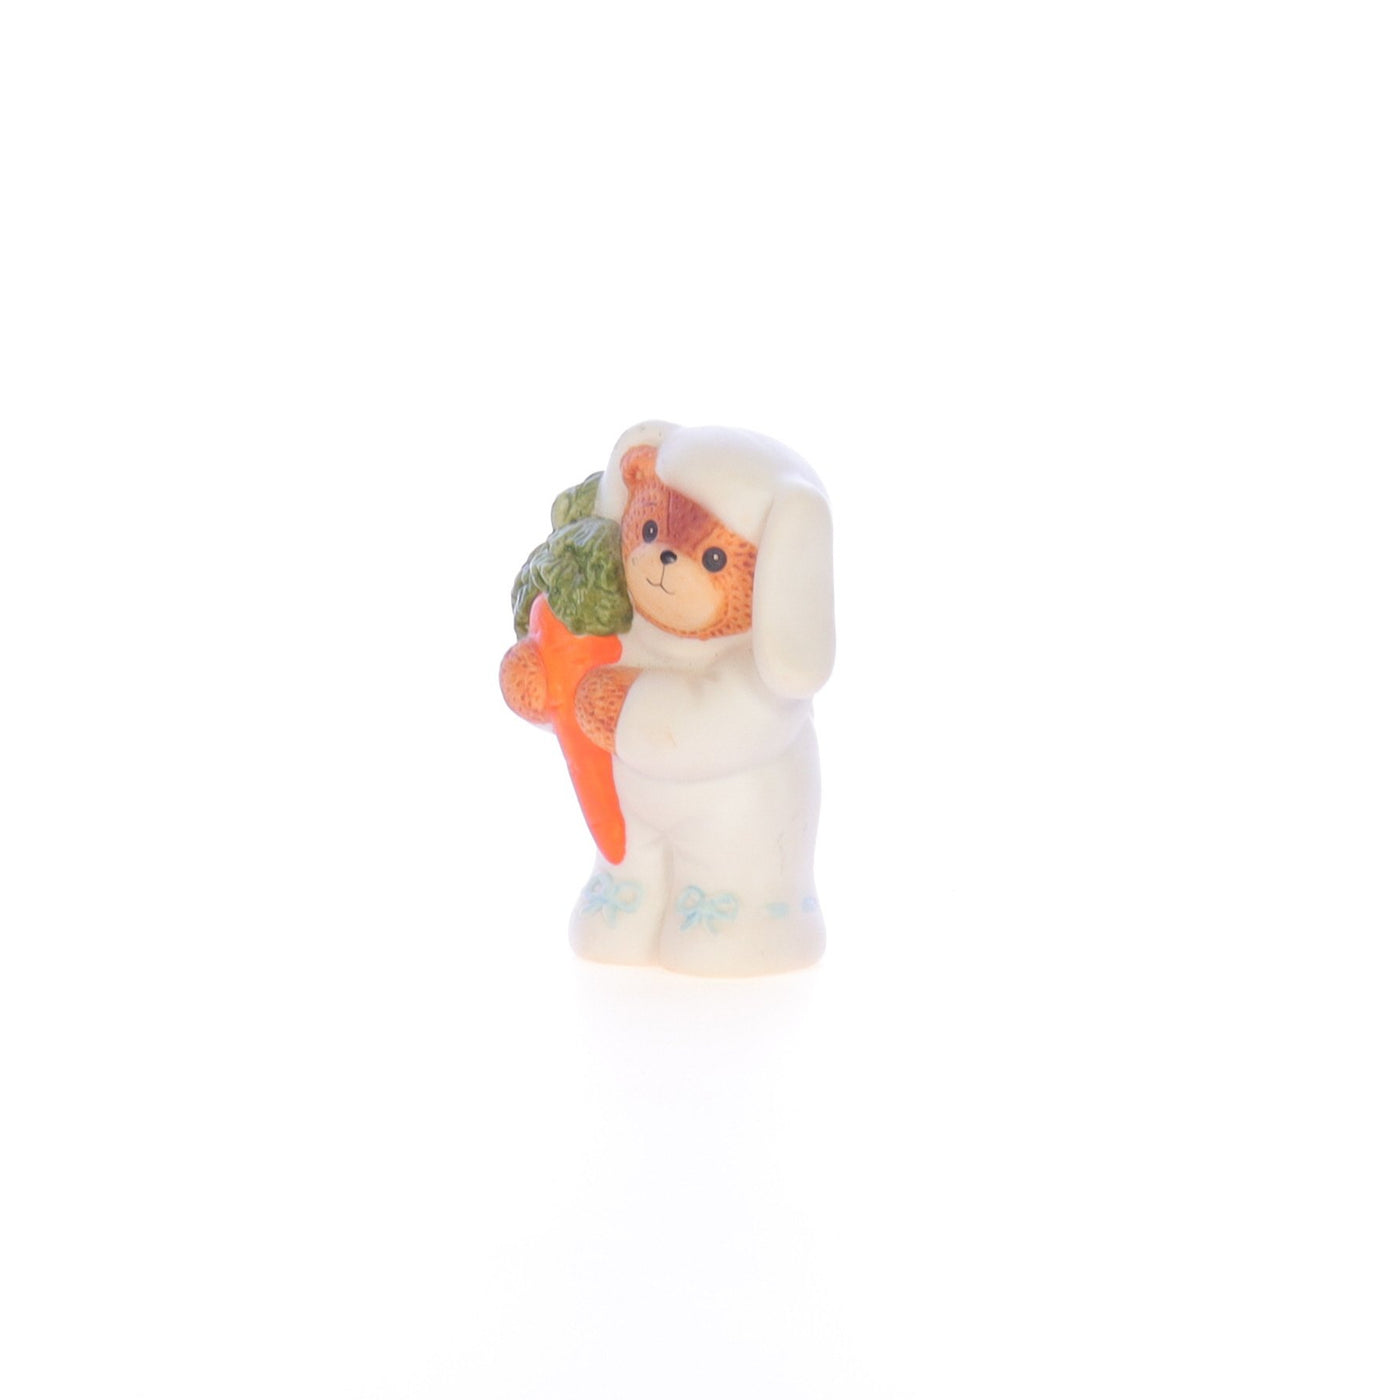 Lucy_And_Me_by_Lucy_Atwell_Porcelain_Figurine_Bear_in_Easter_Bunny_Costume_Lucy_Unknown_040_02